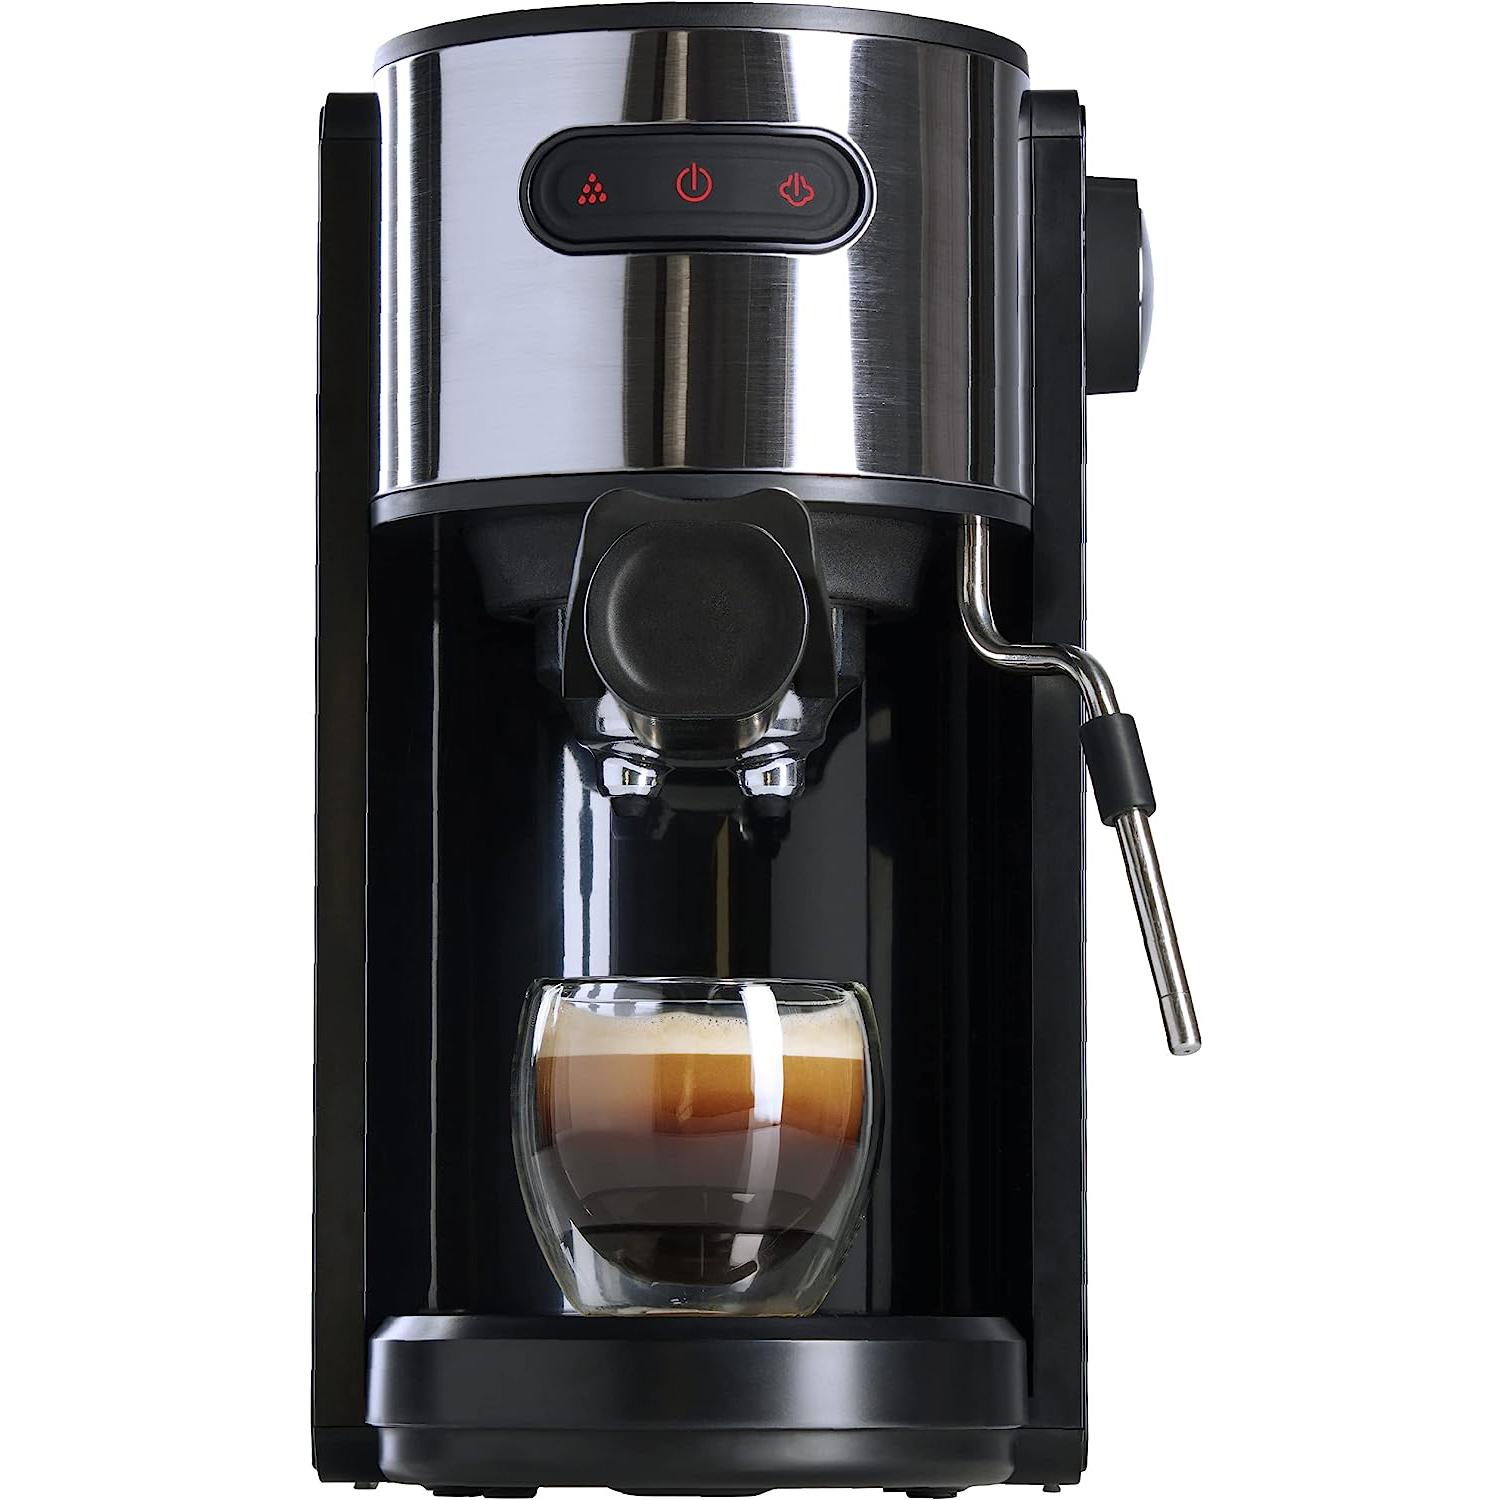 Coffee Gator Espresso Machine with Milk Frother for $28.99 Shipped